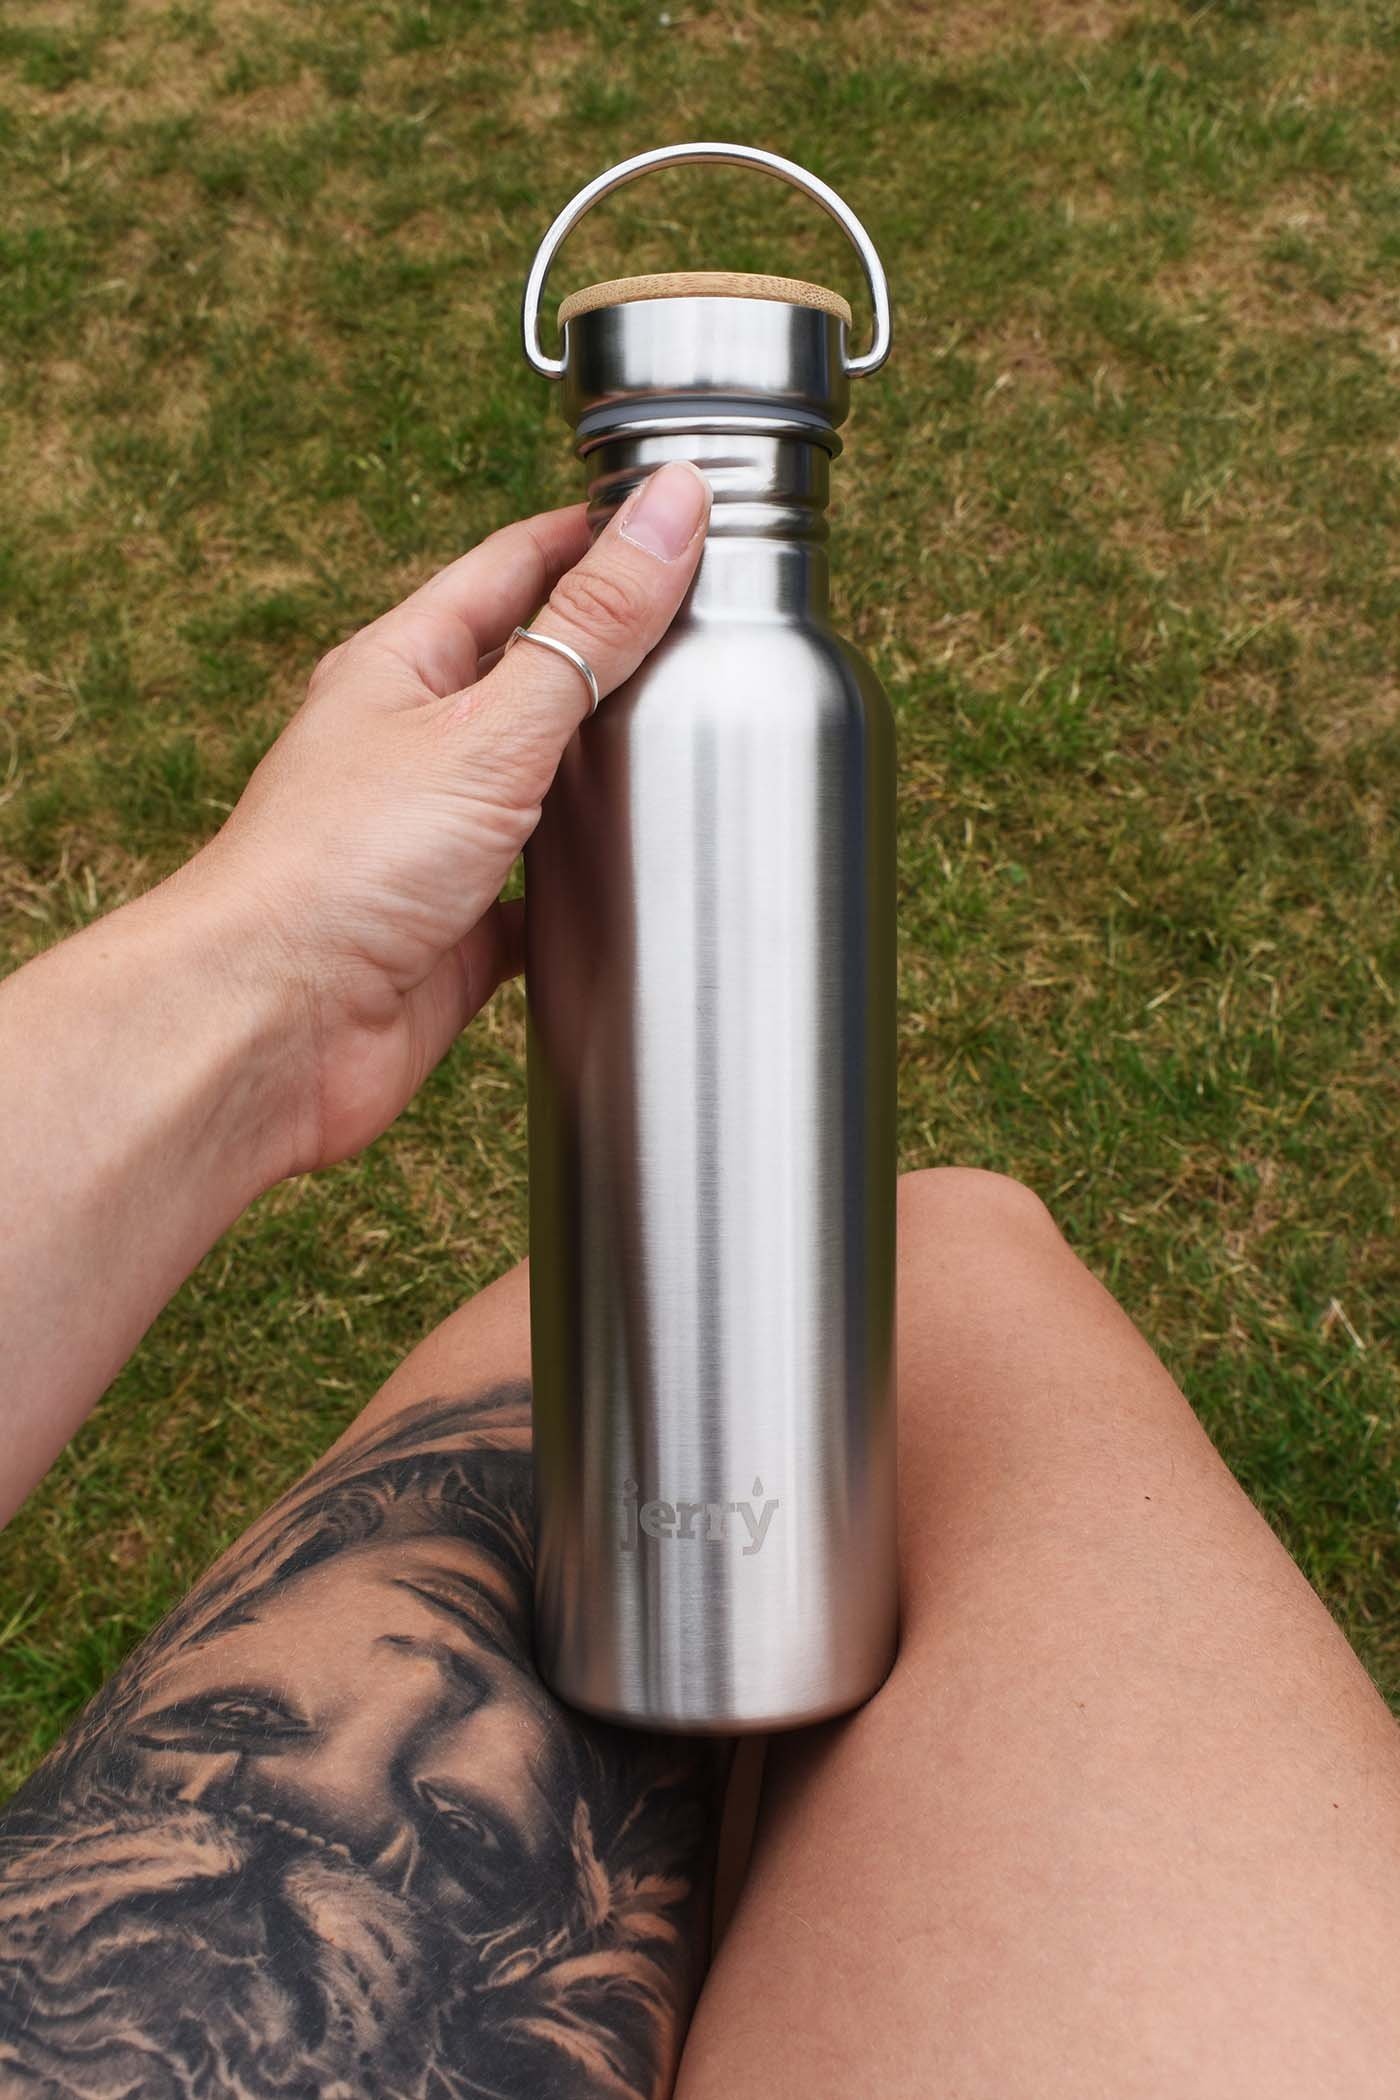 stainless steel water bottle by Jerry